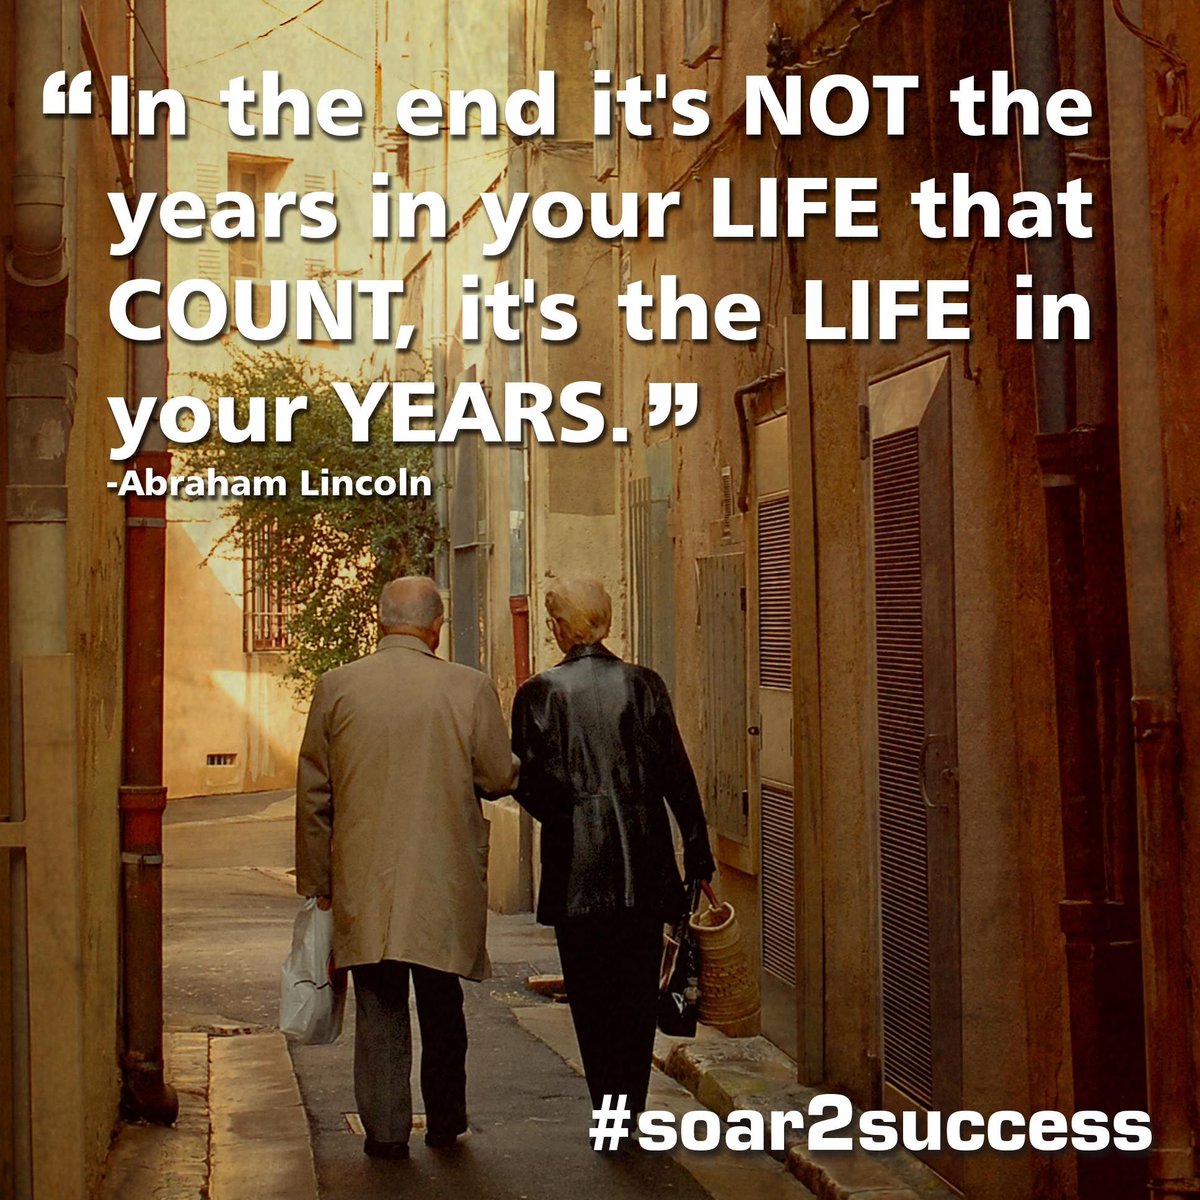 ''In the end it's not the years in your life that count, it's the life in your years.'' - Abrham Lincon #Leadership #Pilotspeaker #Soar2Success